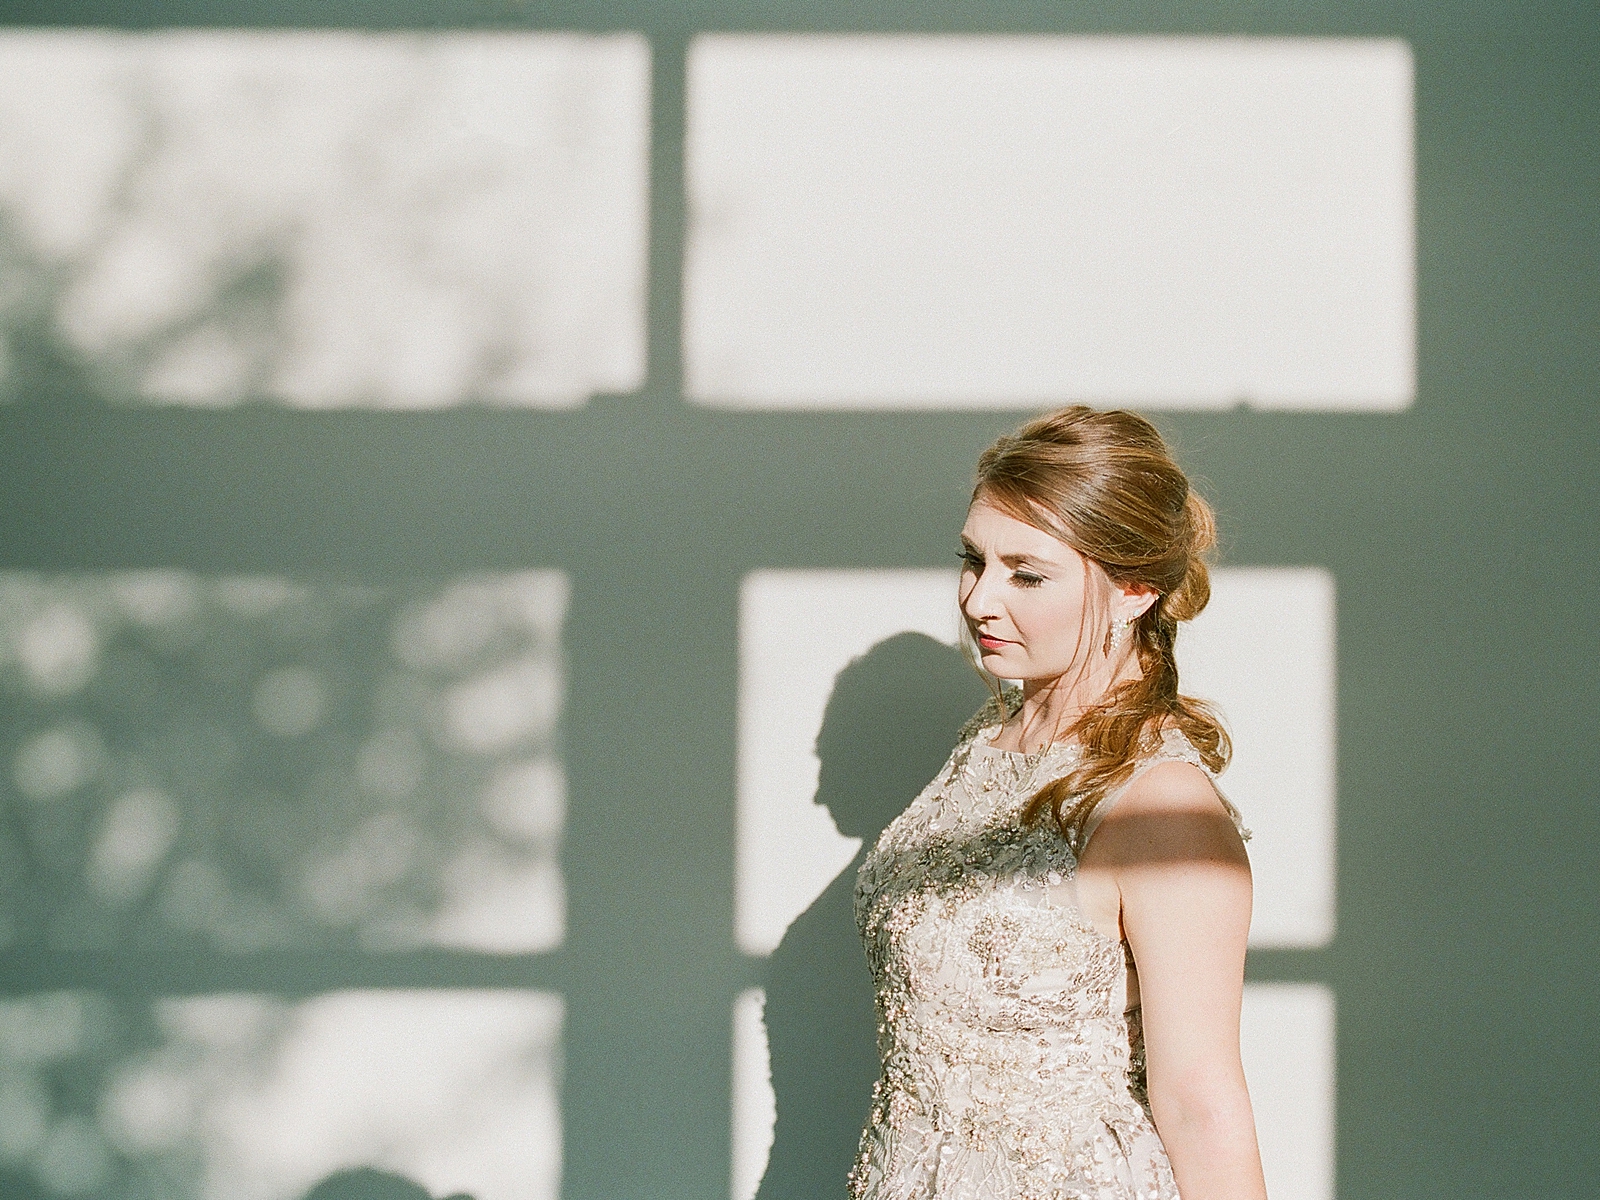 Asheville Bridal Editorial Bride Looking Down with Window Shadows Photo